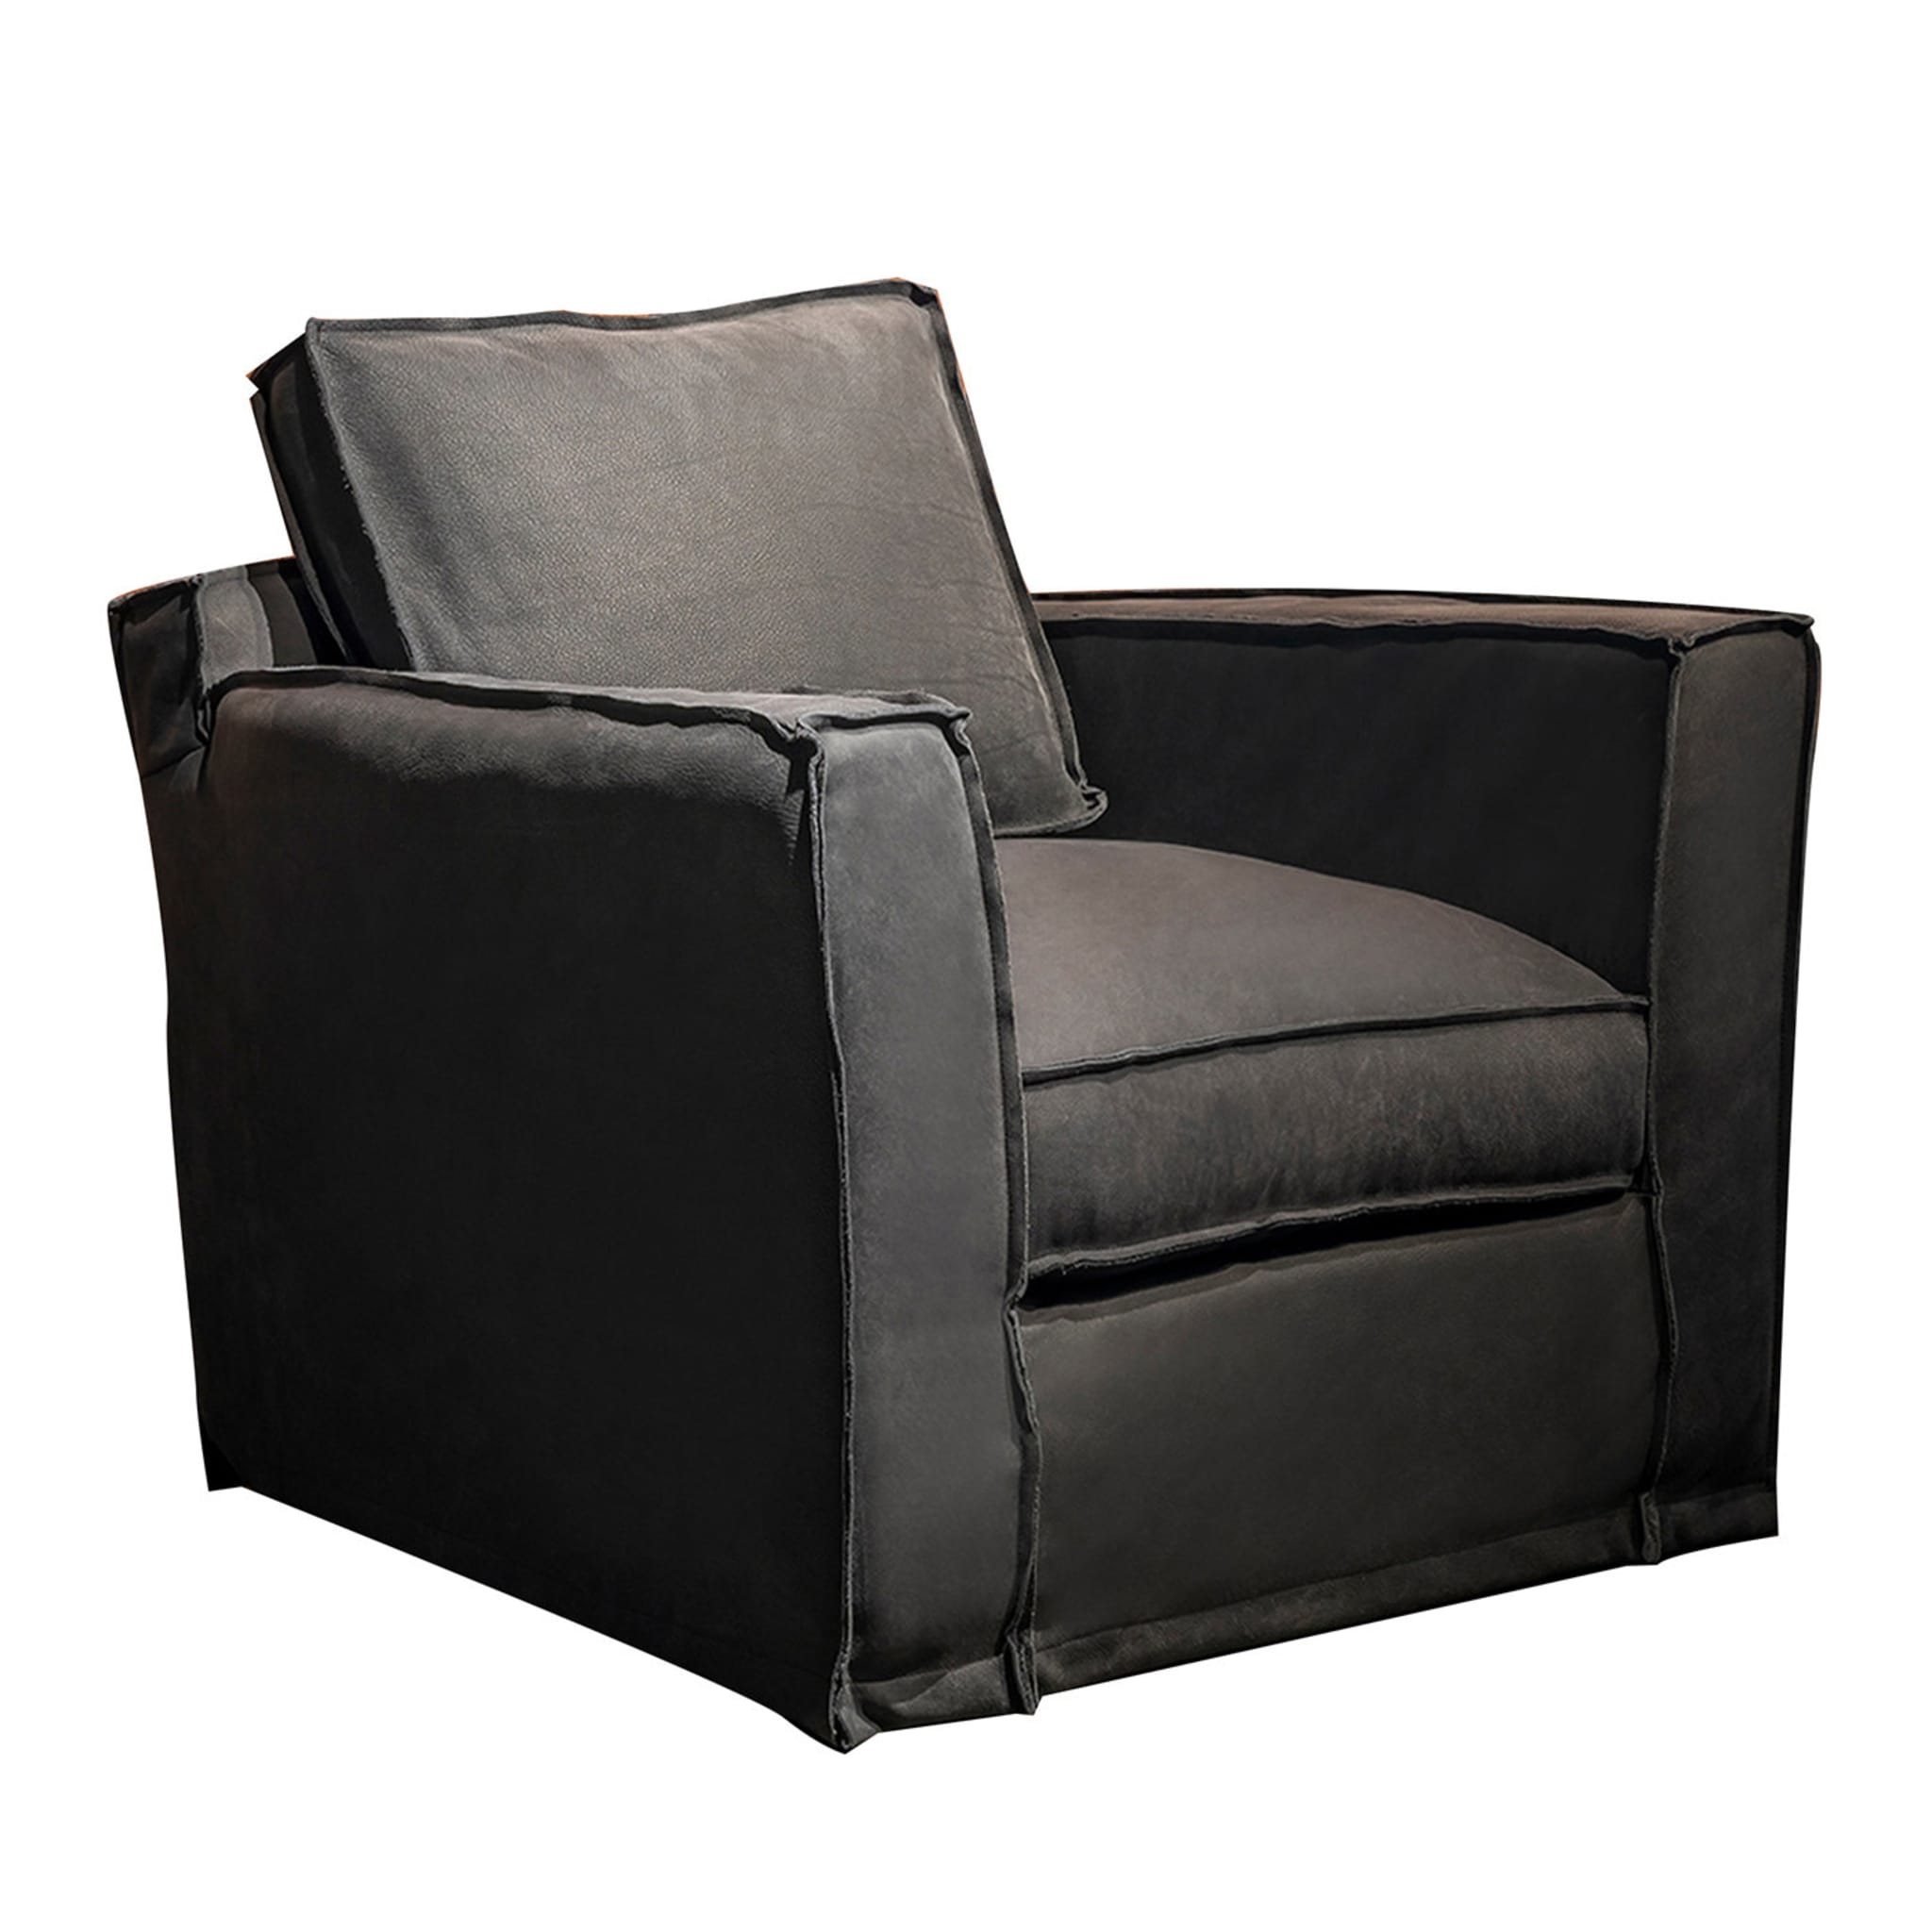 Key West Gray Armchair - Main view